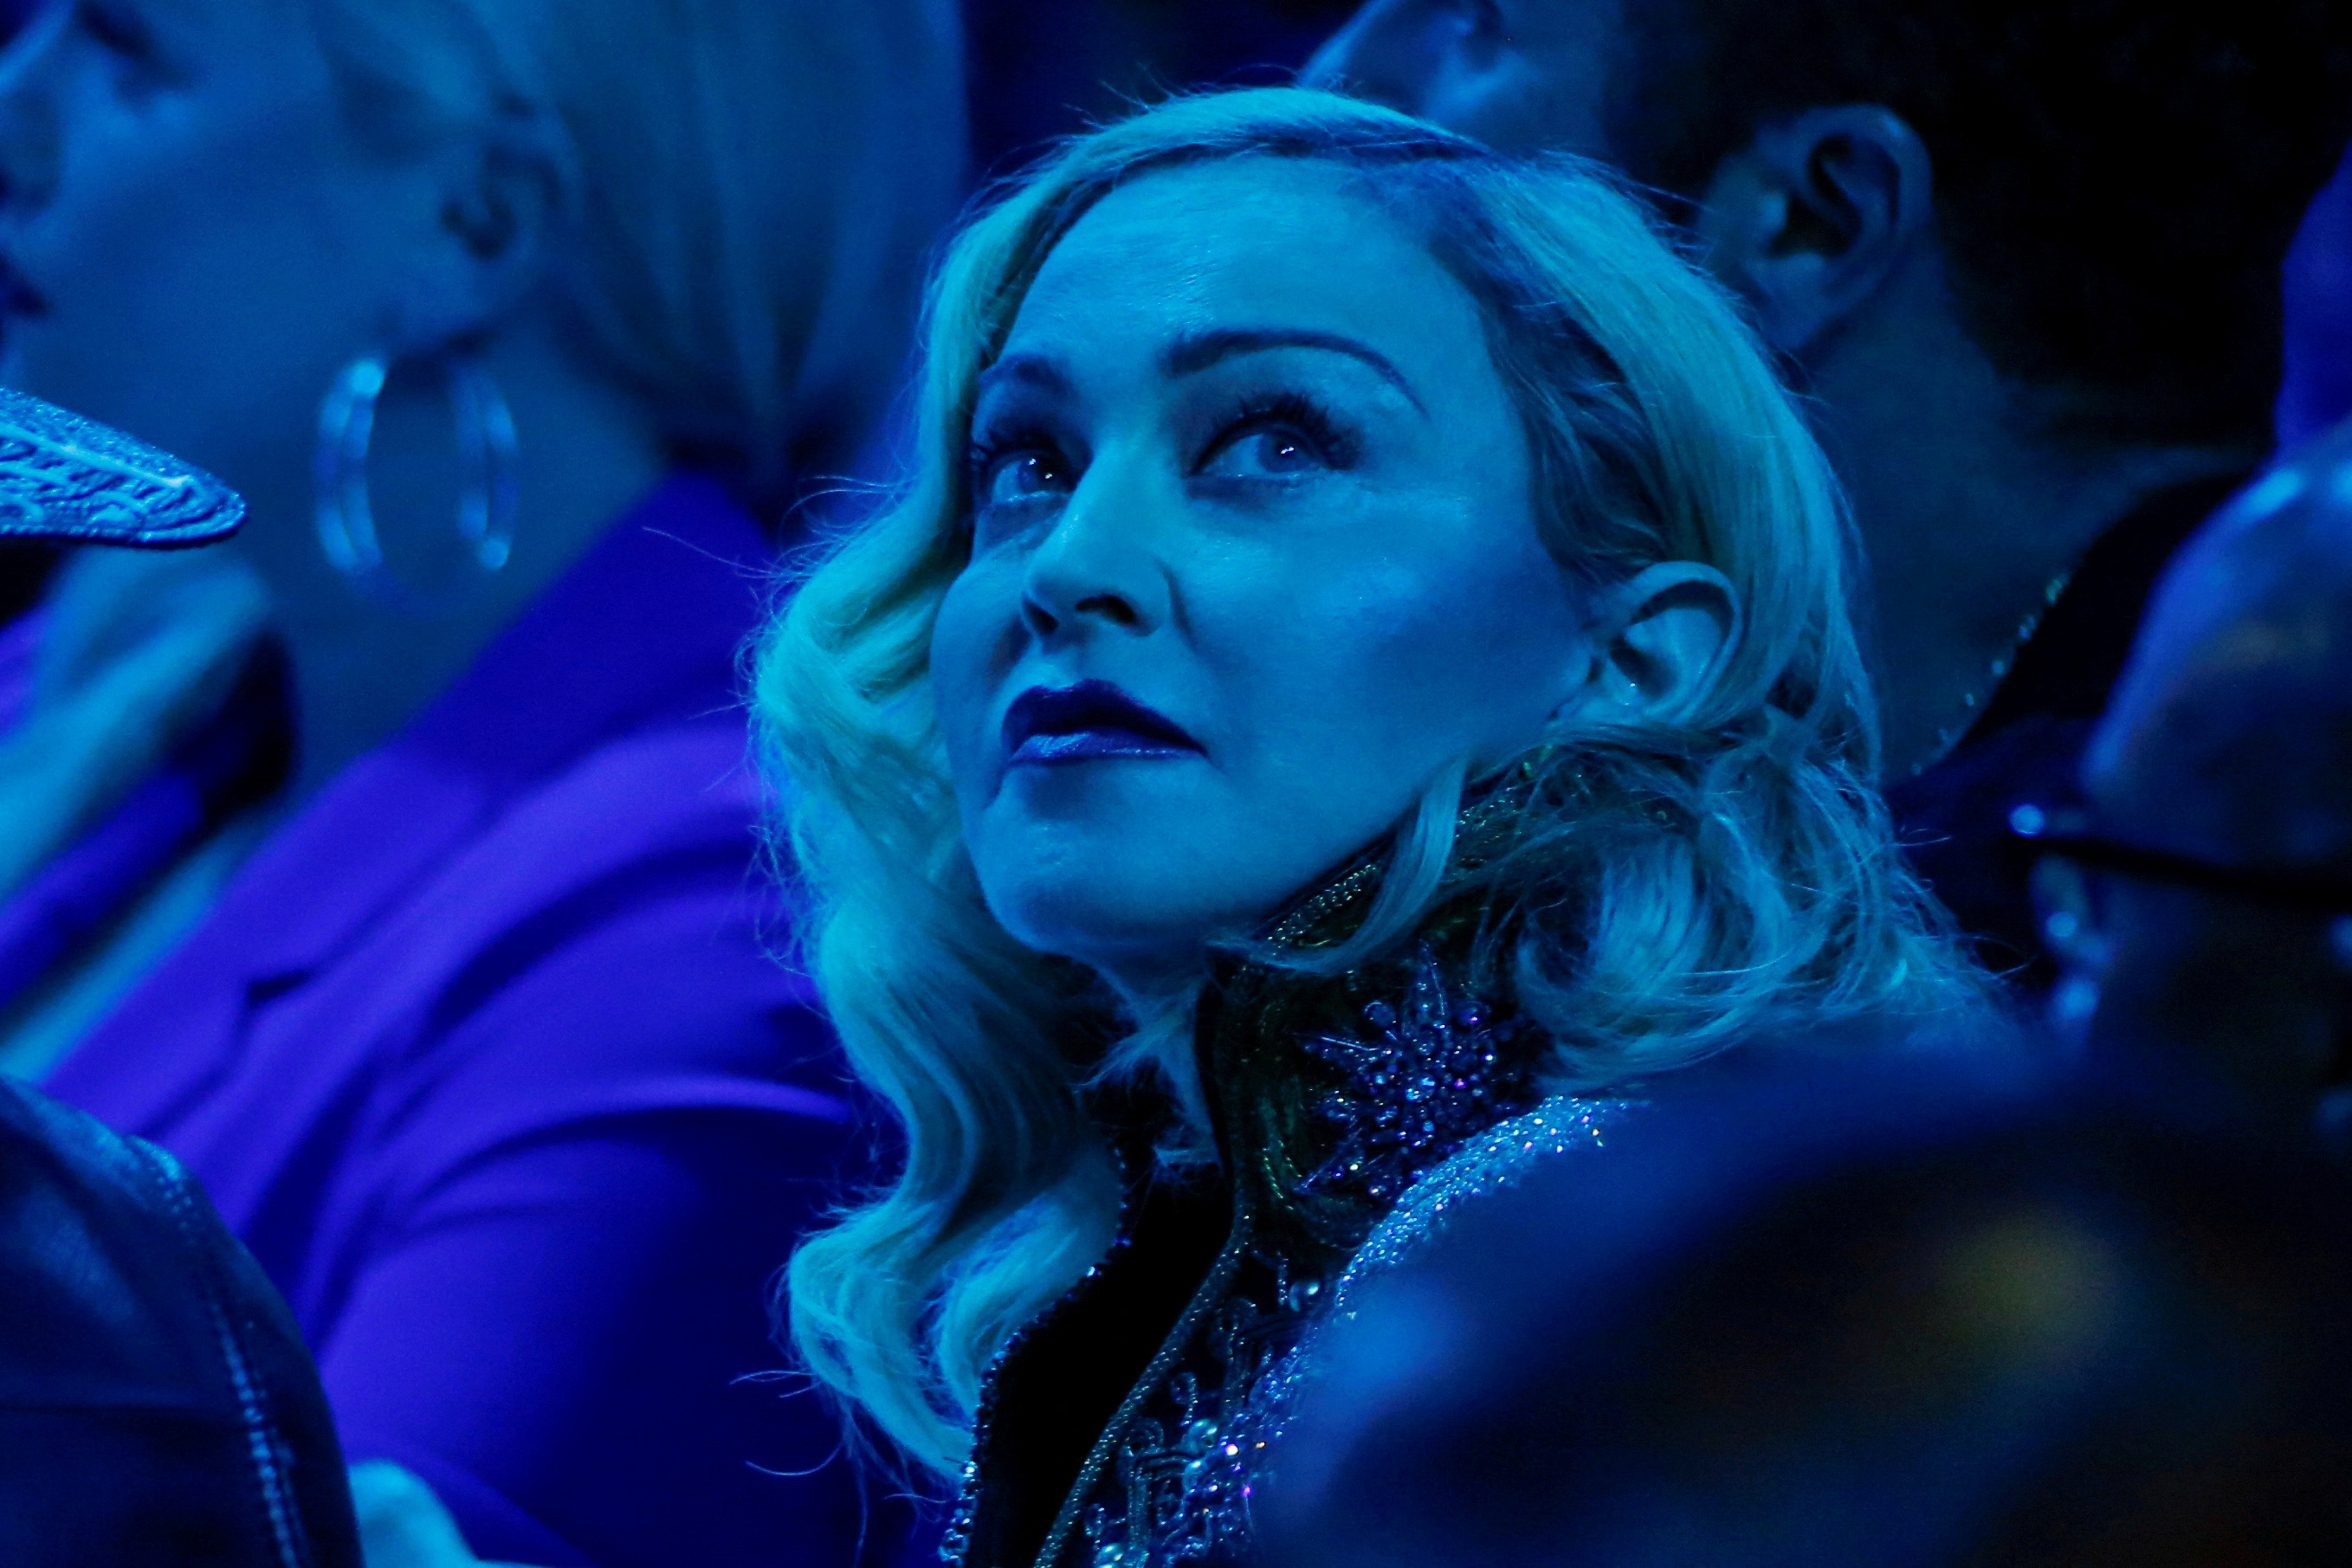 FILE PHOTO: Singer Madonna attends the 30th annual GLAAD awards ceremony in New York City, New York